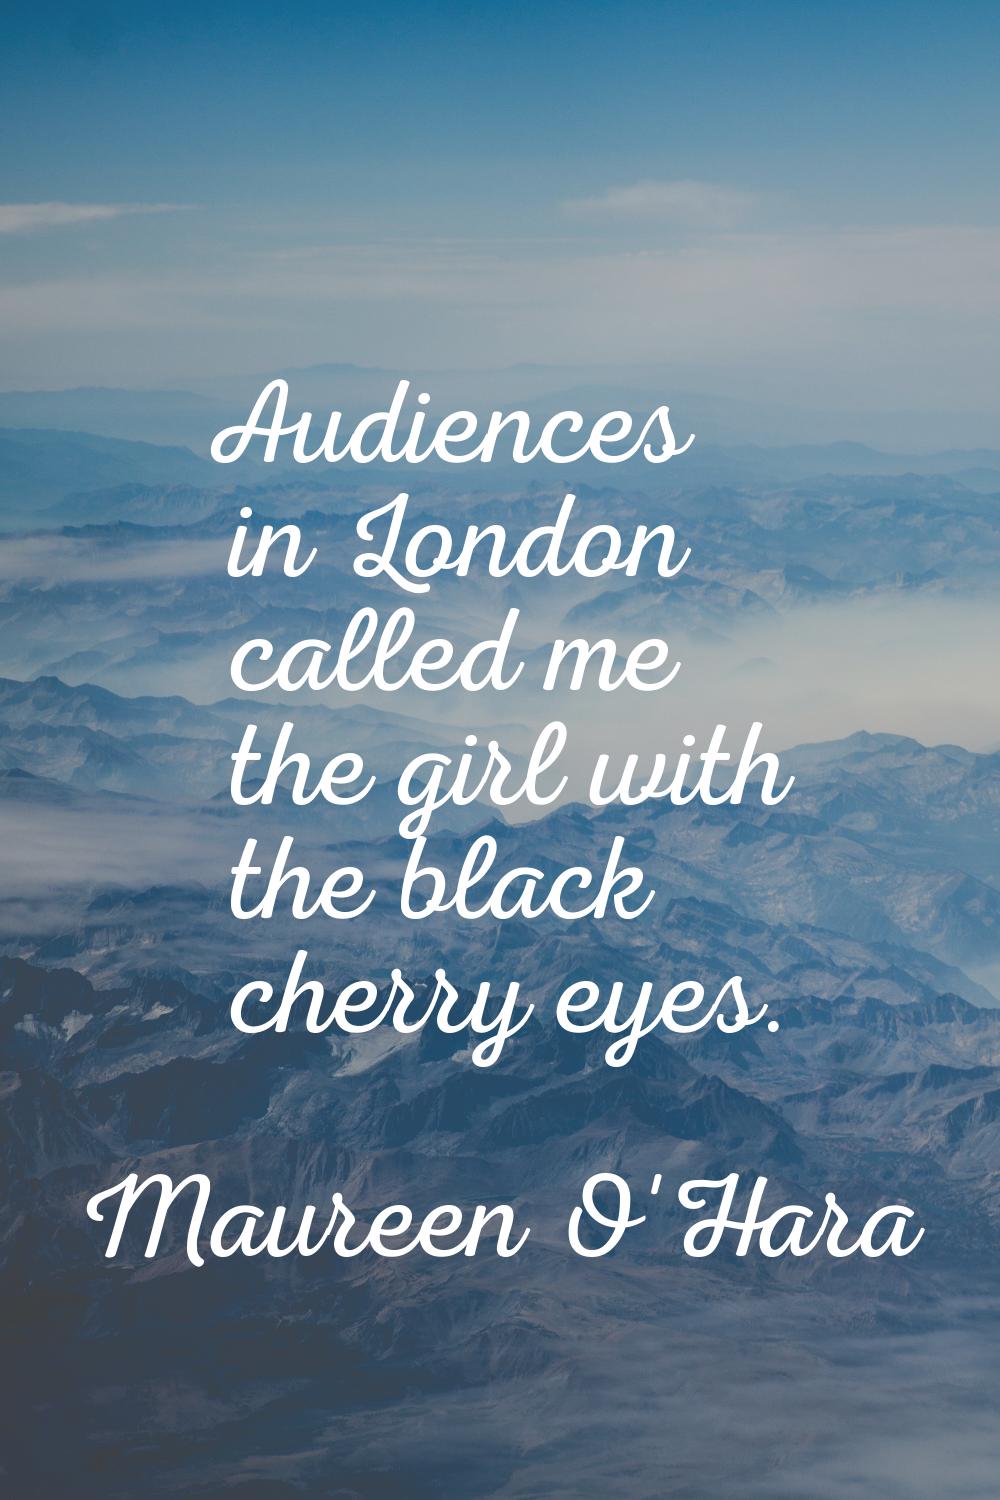 Audiences in London called me the girl with the black cherry eyes.